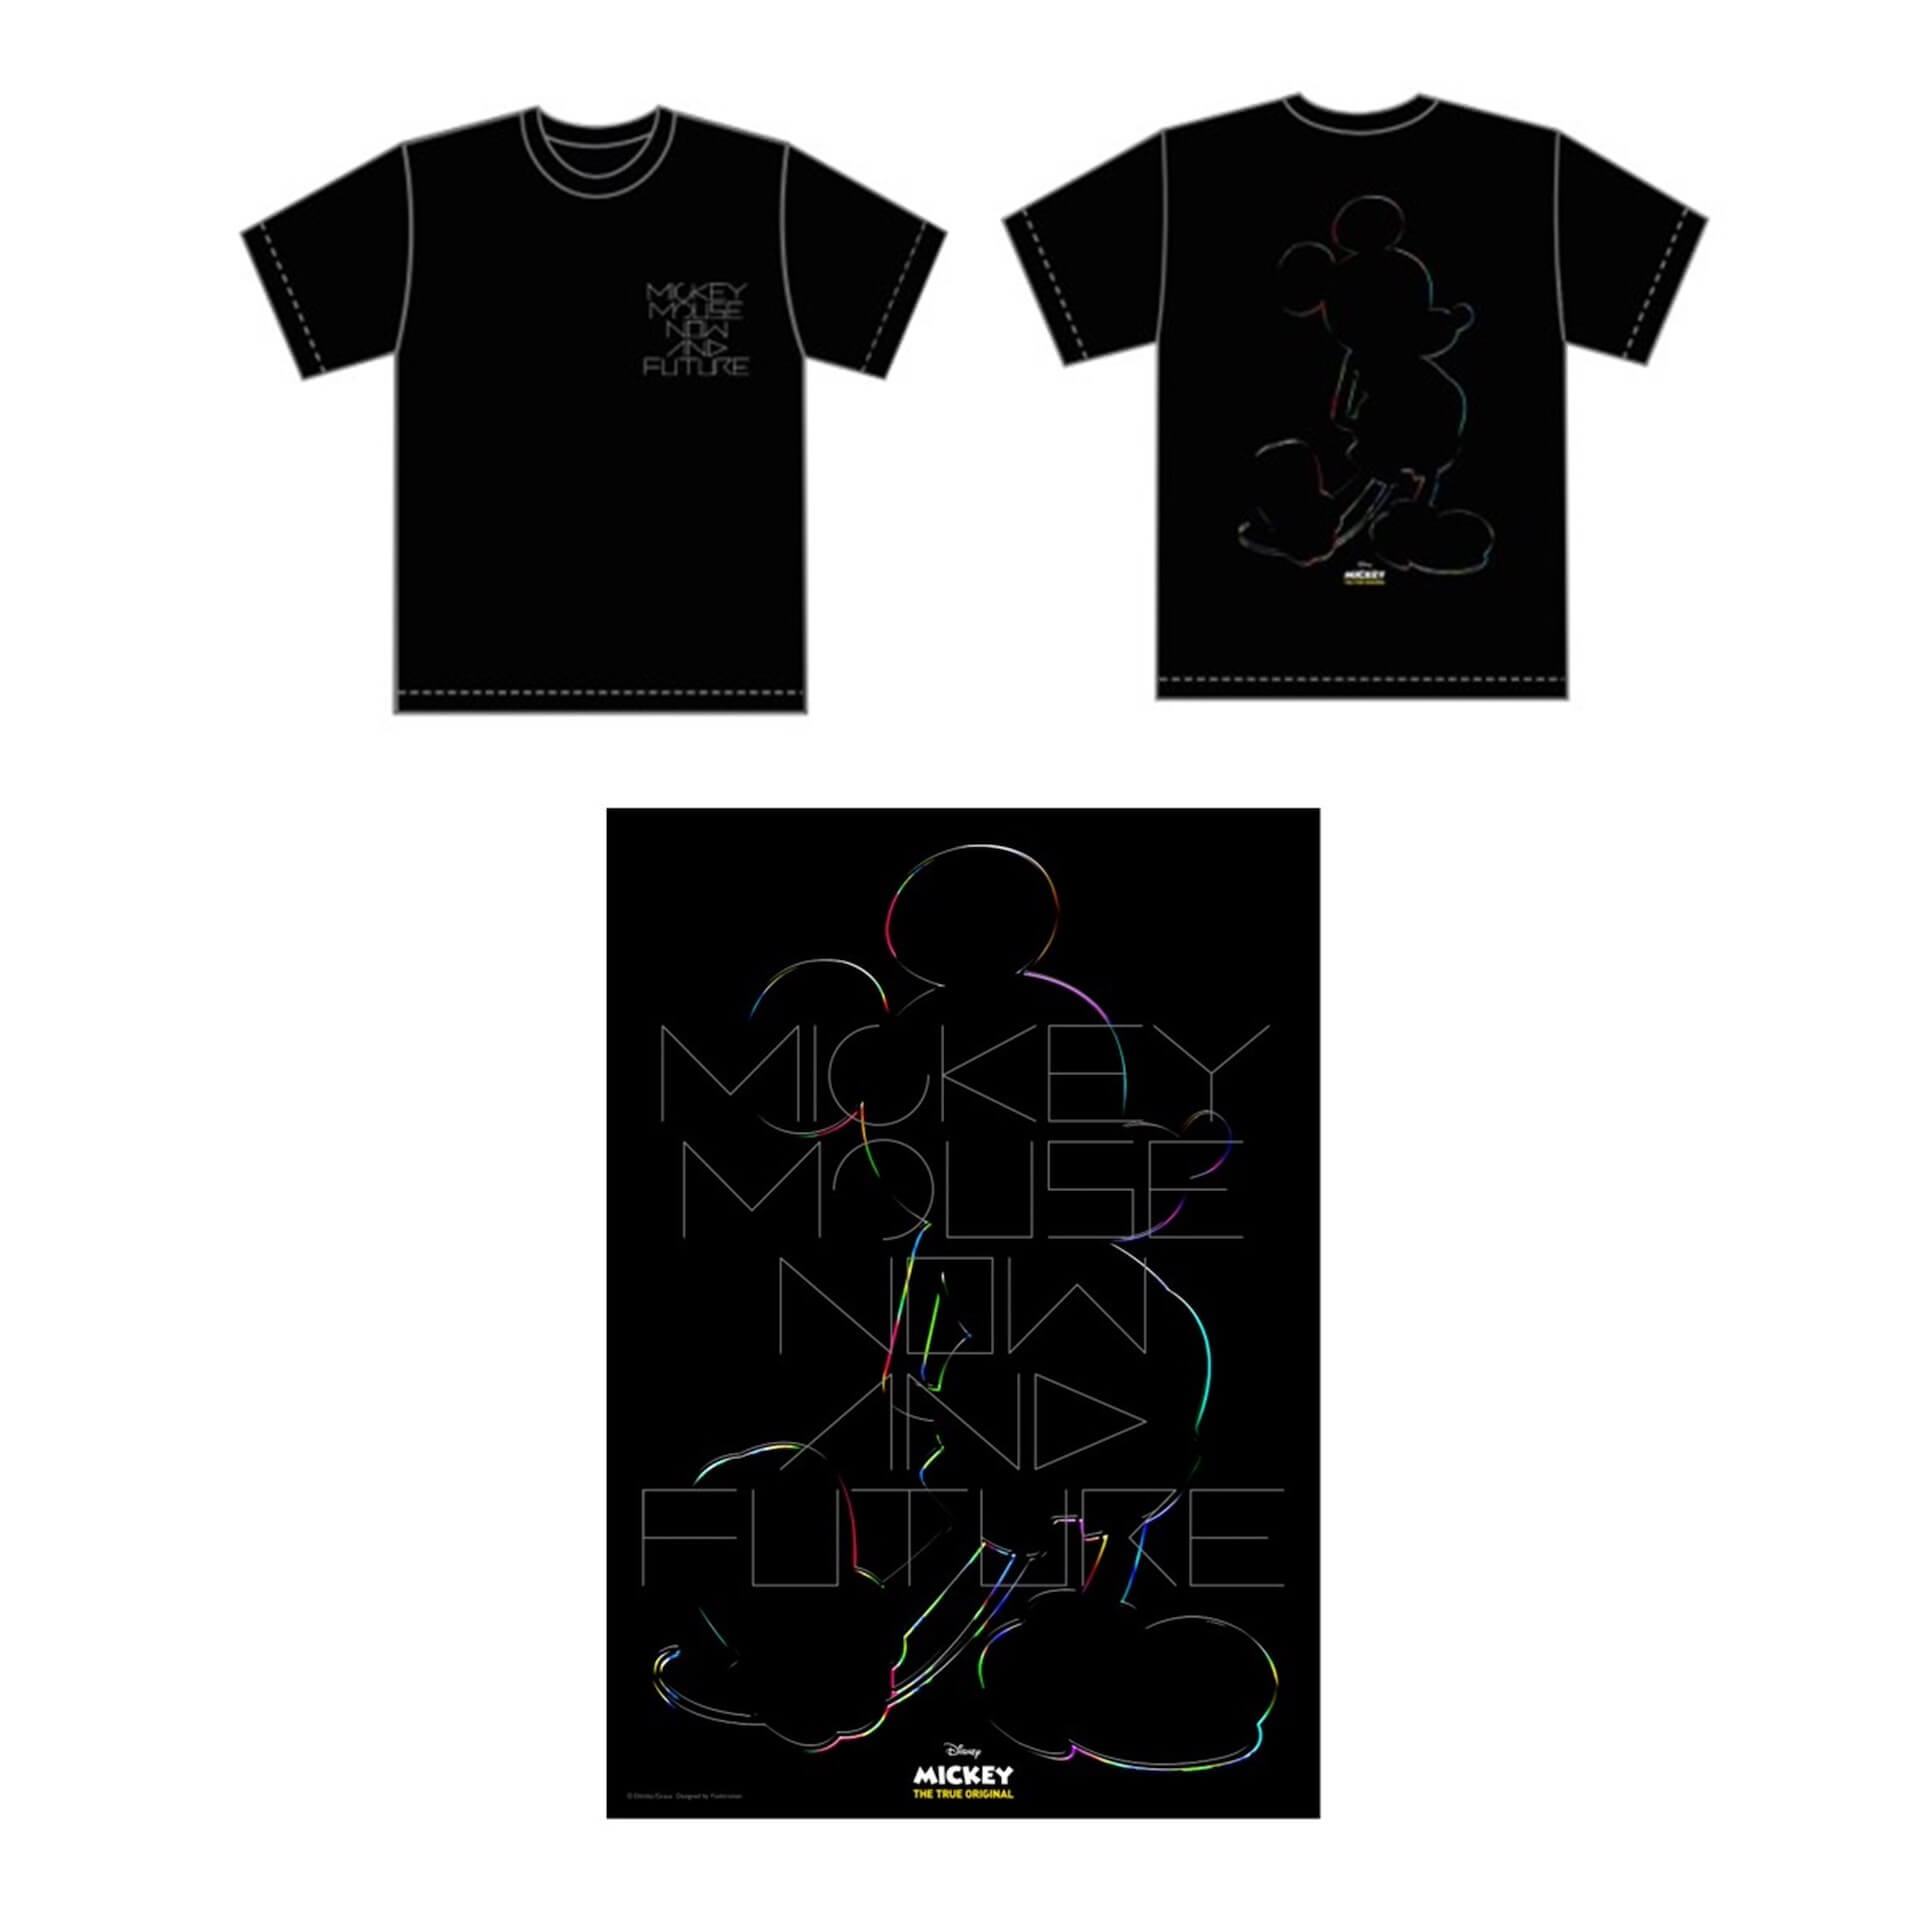 PARCO MUSEUM TOKYOにて＜Mickey Mouse Now and Future＞展が開催